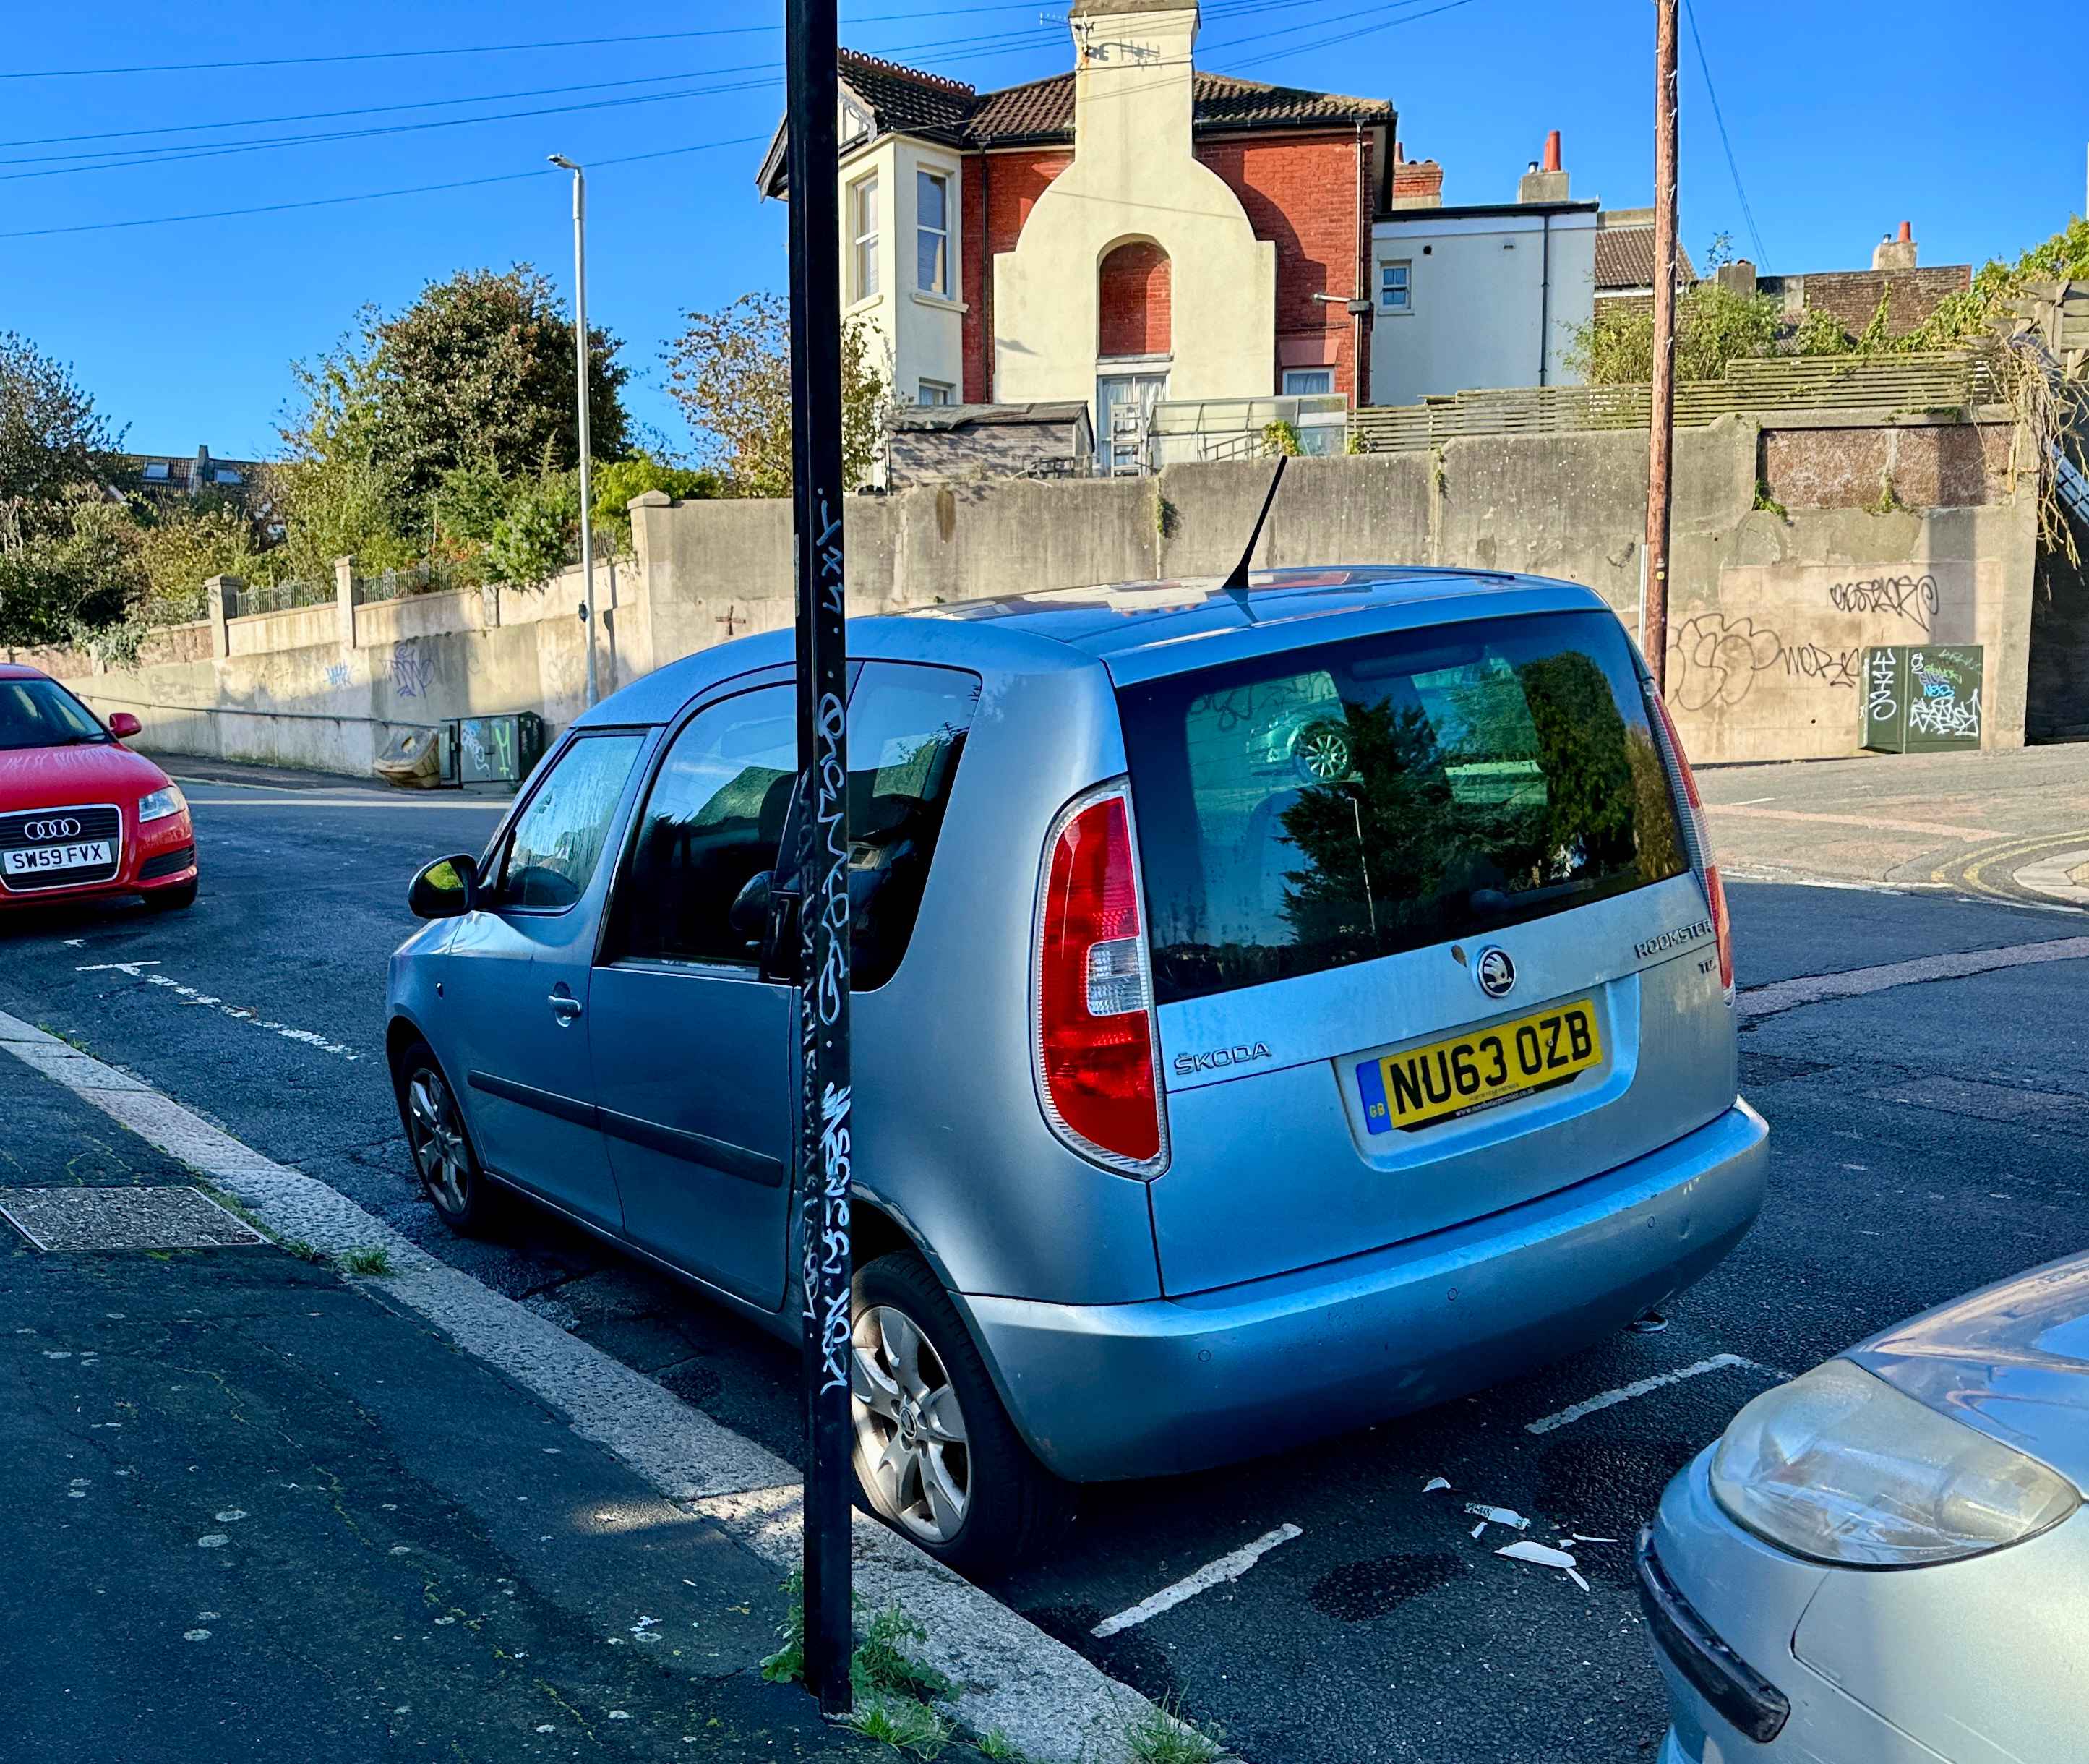 Photograph of NU63 OZB - a Blue Skoda Roomster parked in Hollingdean by a non-resident. The tenth of nineteen photographs supplied by the residents of Hollingdean.